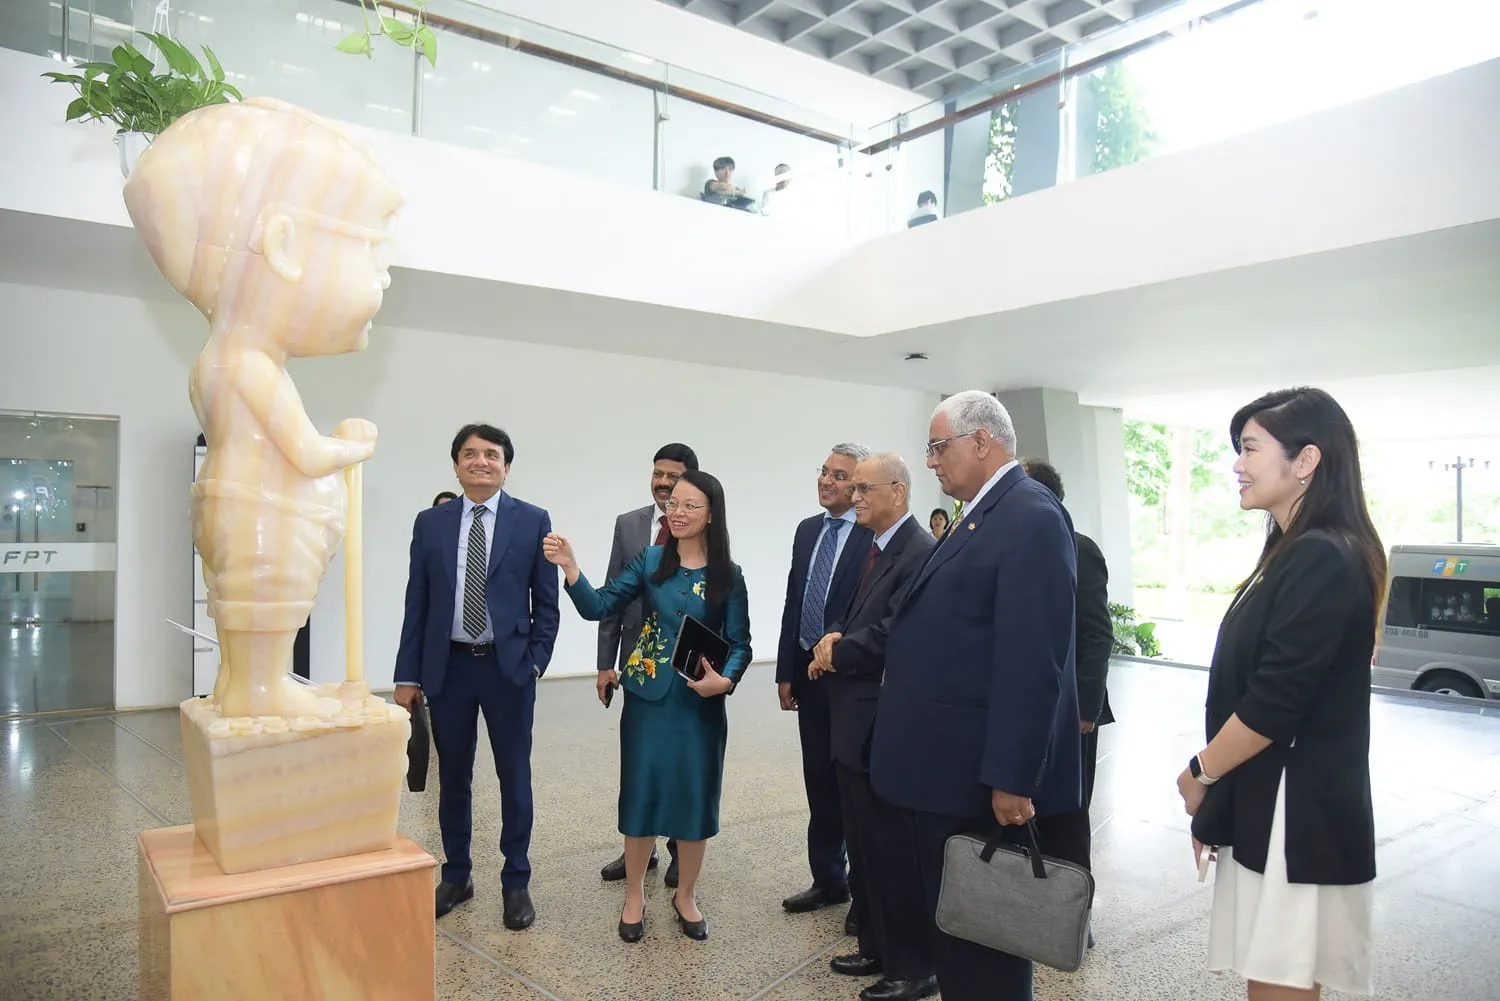 Ms. Chu Thi Thanh Ha, Chairperson of FPT Software, unveiled the company's campus at Hoa Lac Hi-Tech Park alongside Mr. Narayana Murthy.